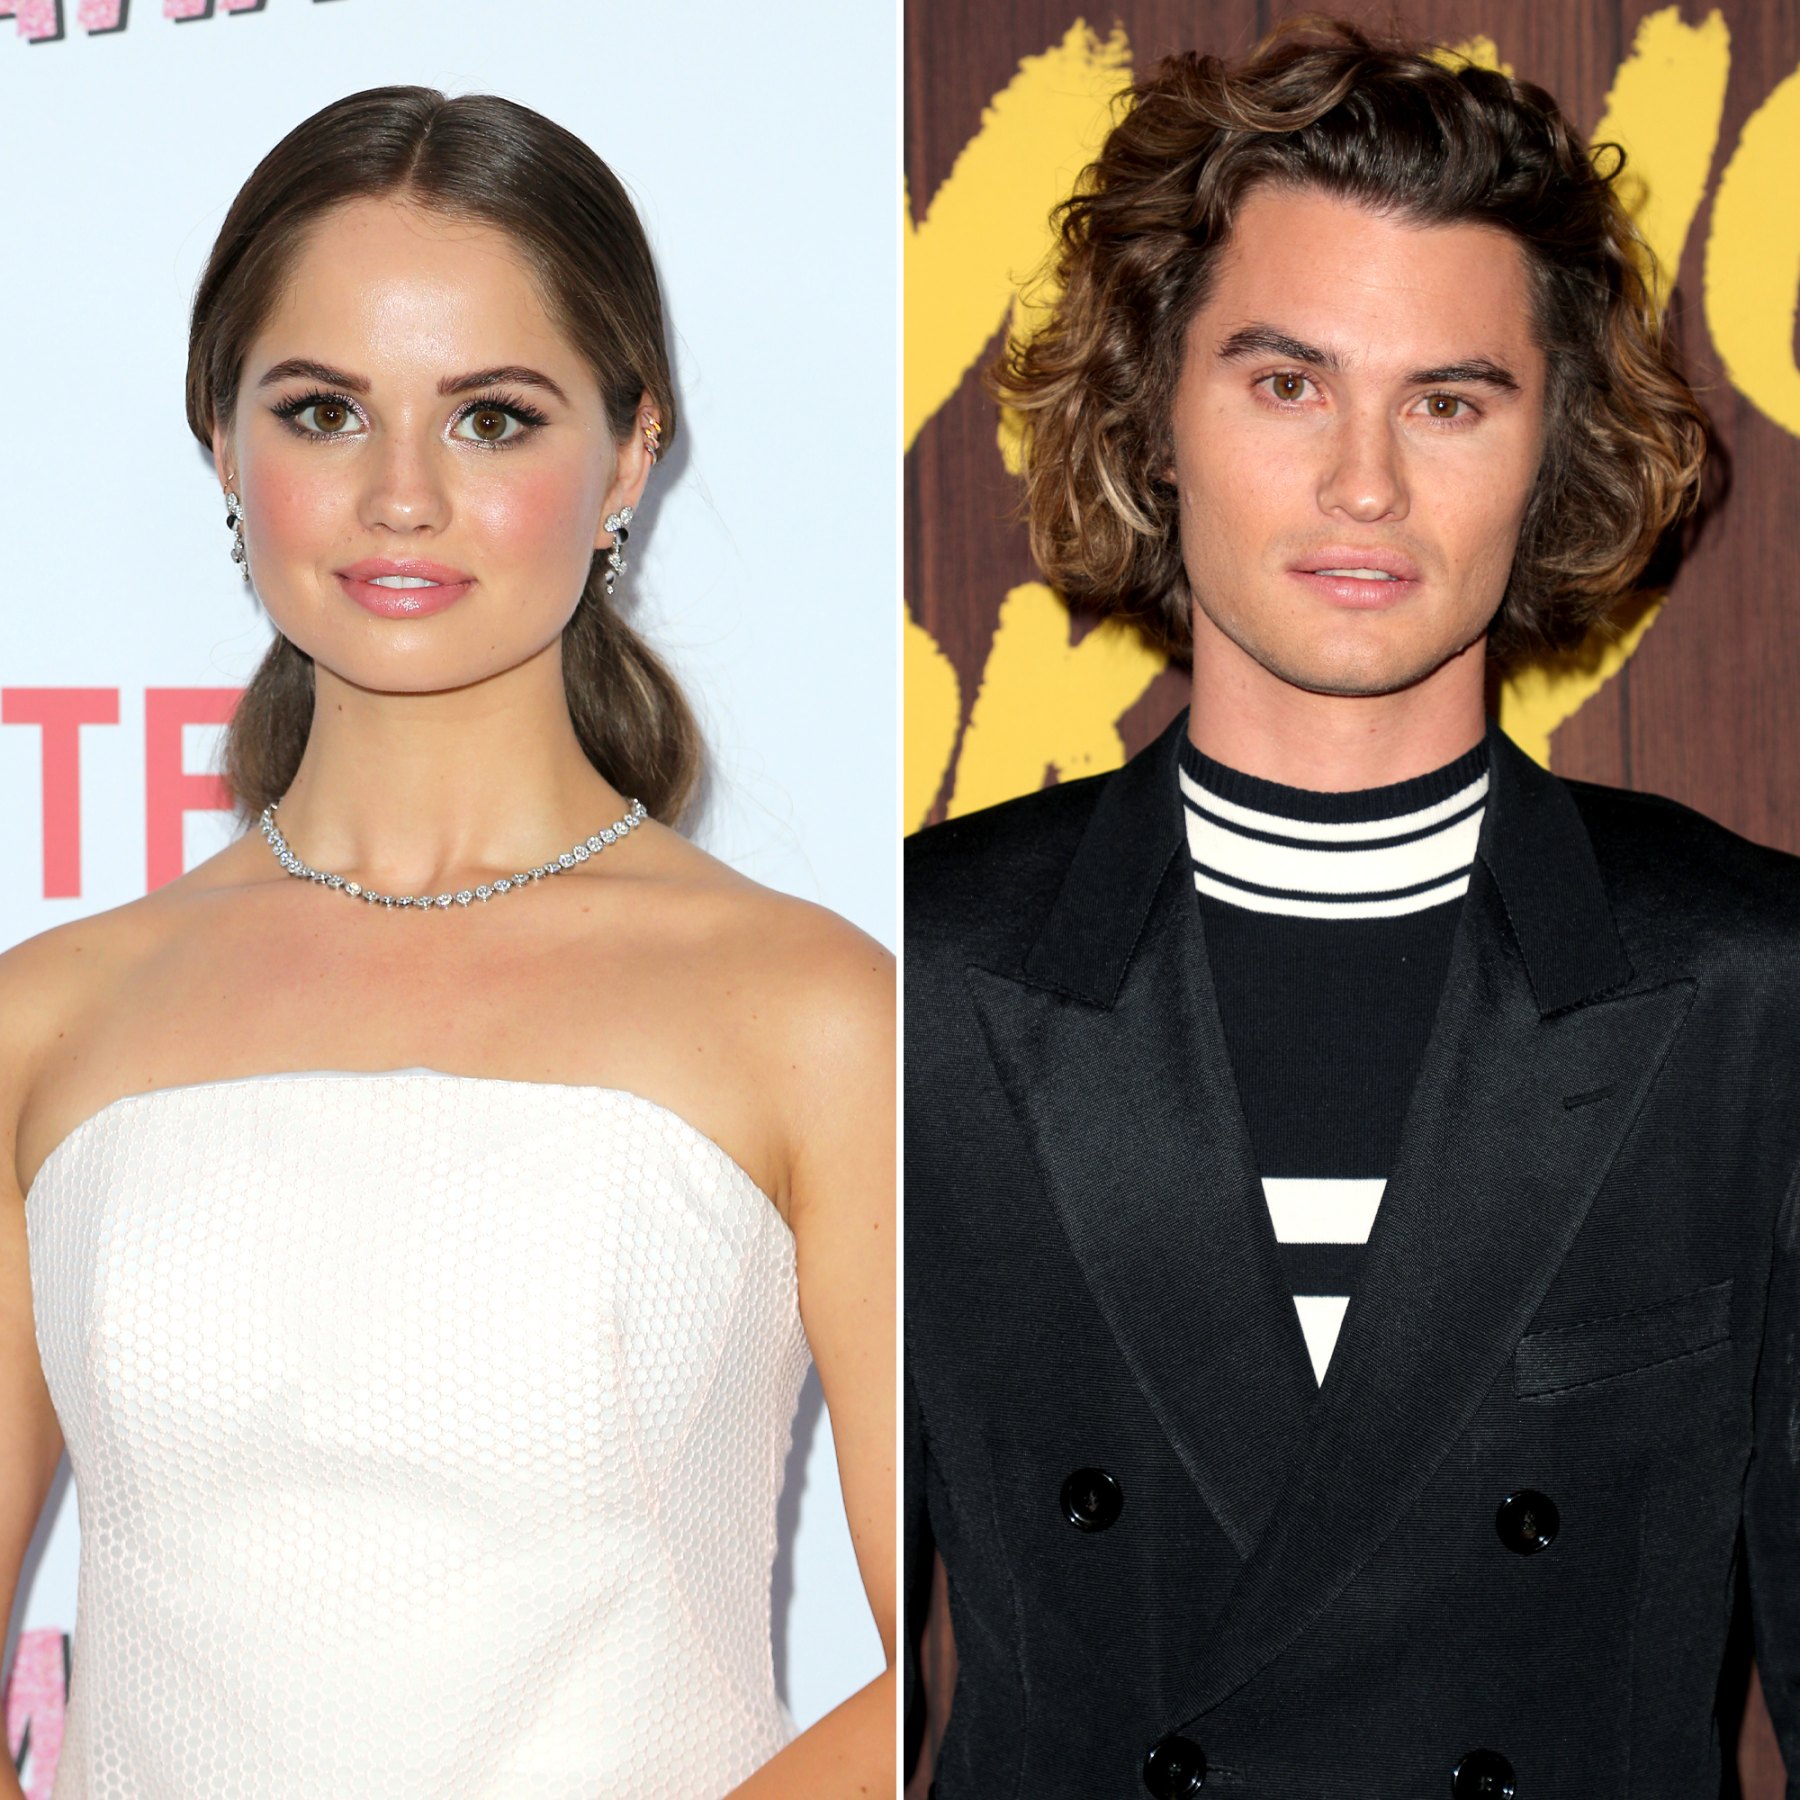 Debby Ryan Reacts To Theory She And Chase Stokes Are The Same Person Us Weekly 